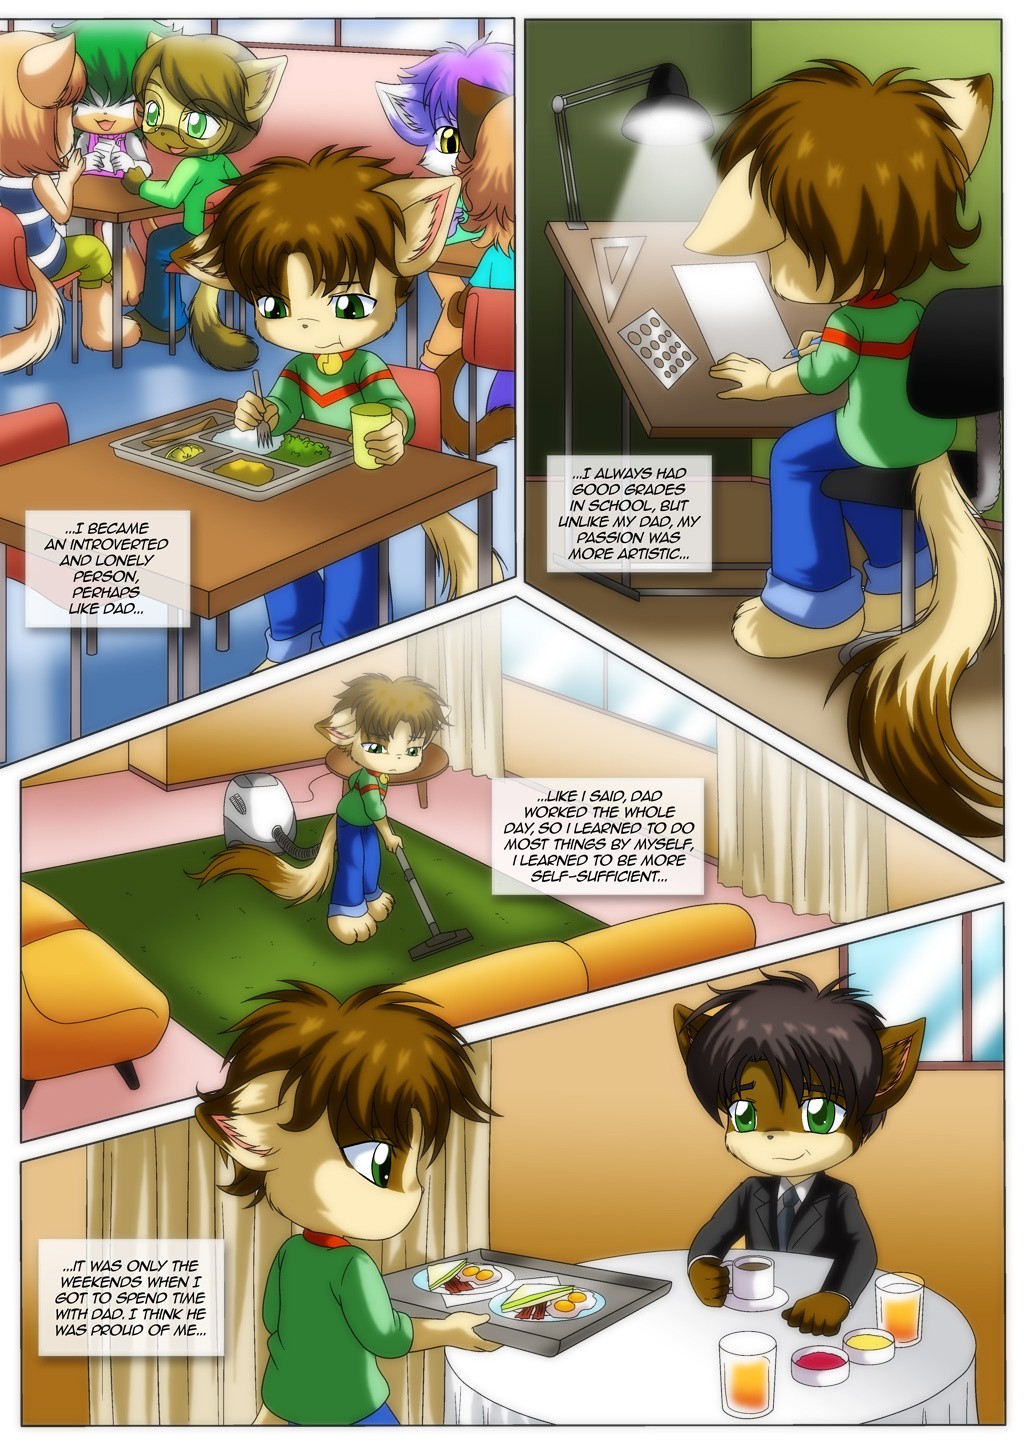 Little Tails 6: Missing The Light of The Day porn comic picture 23